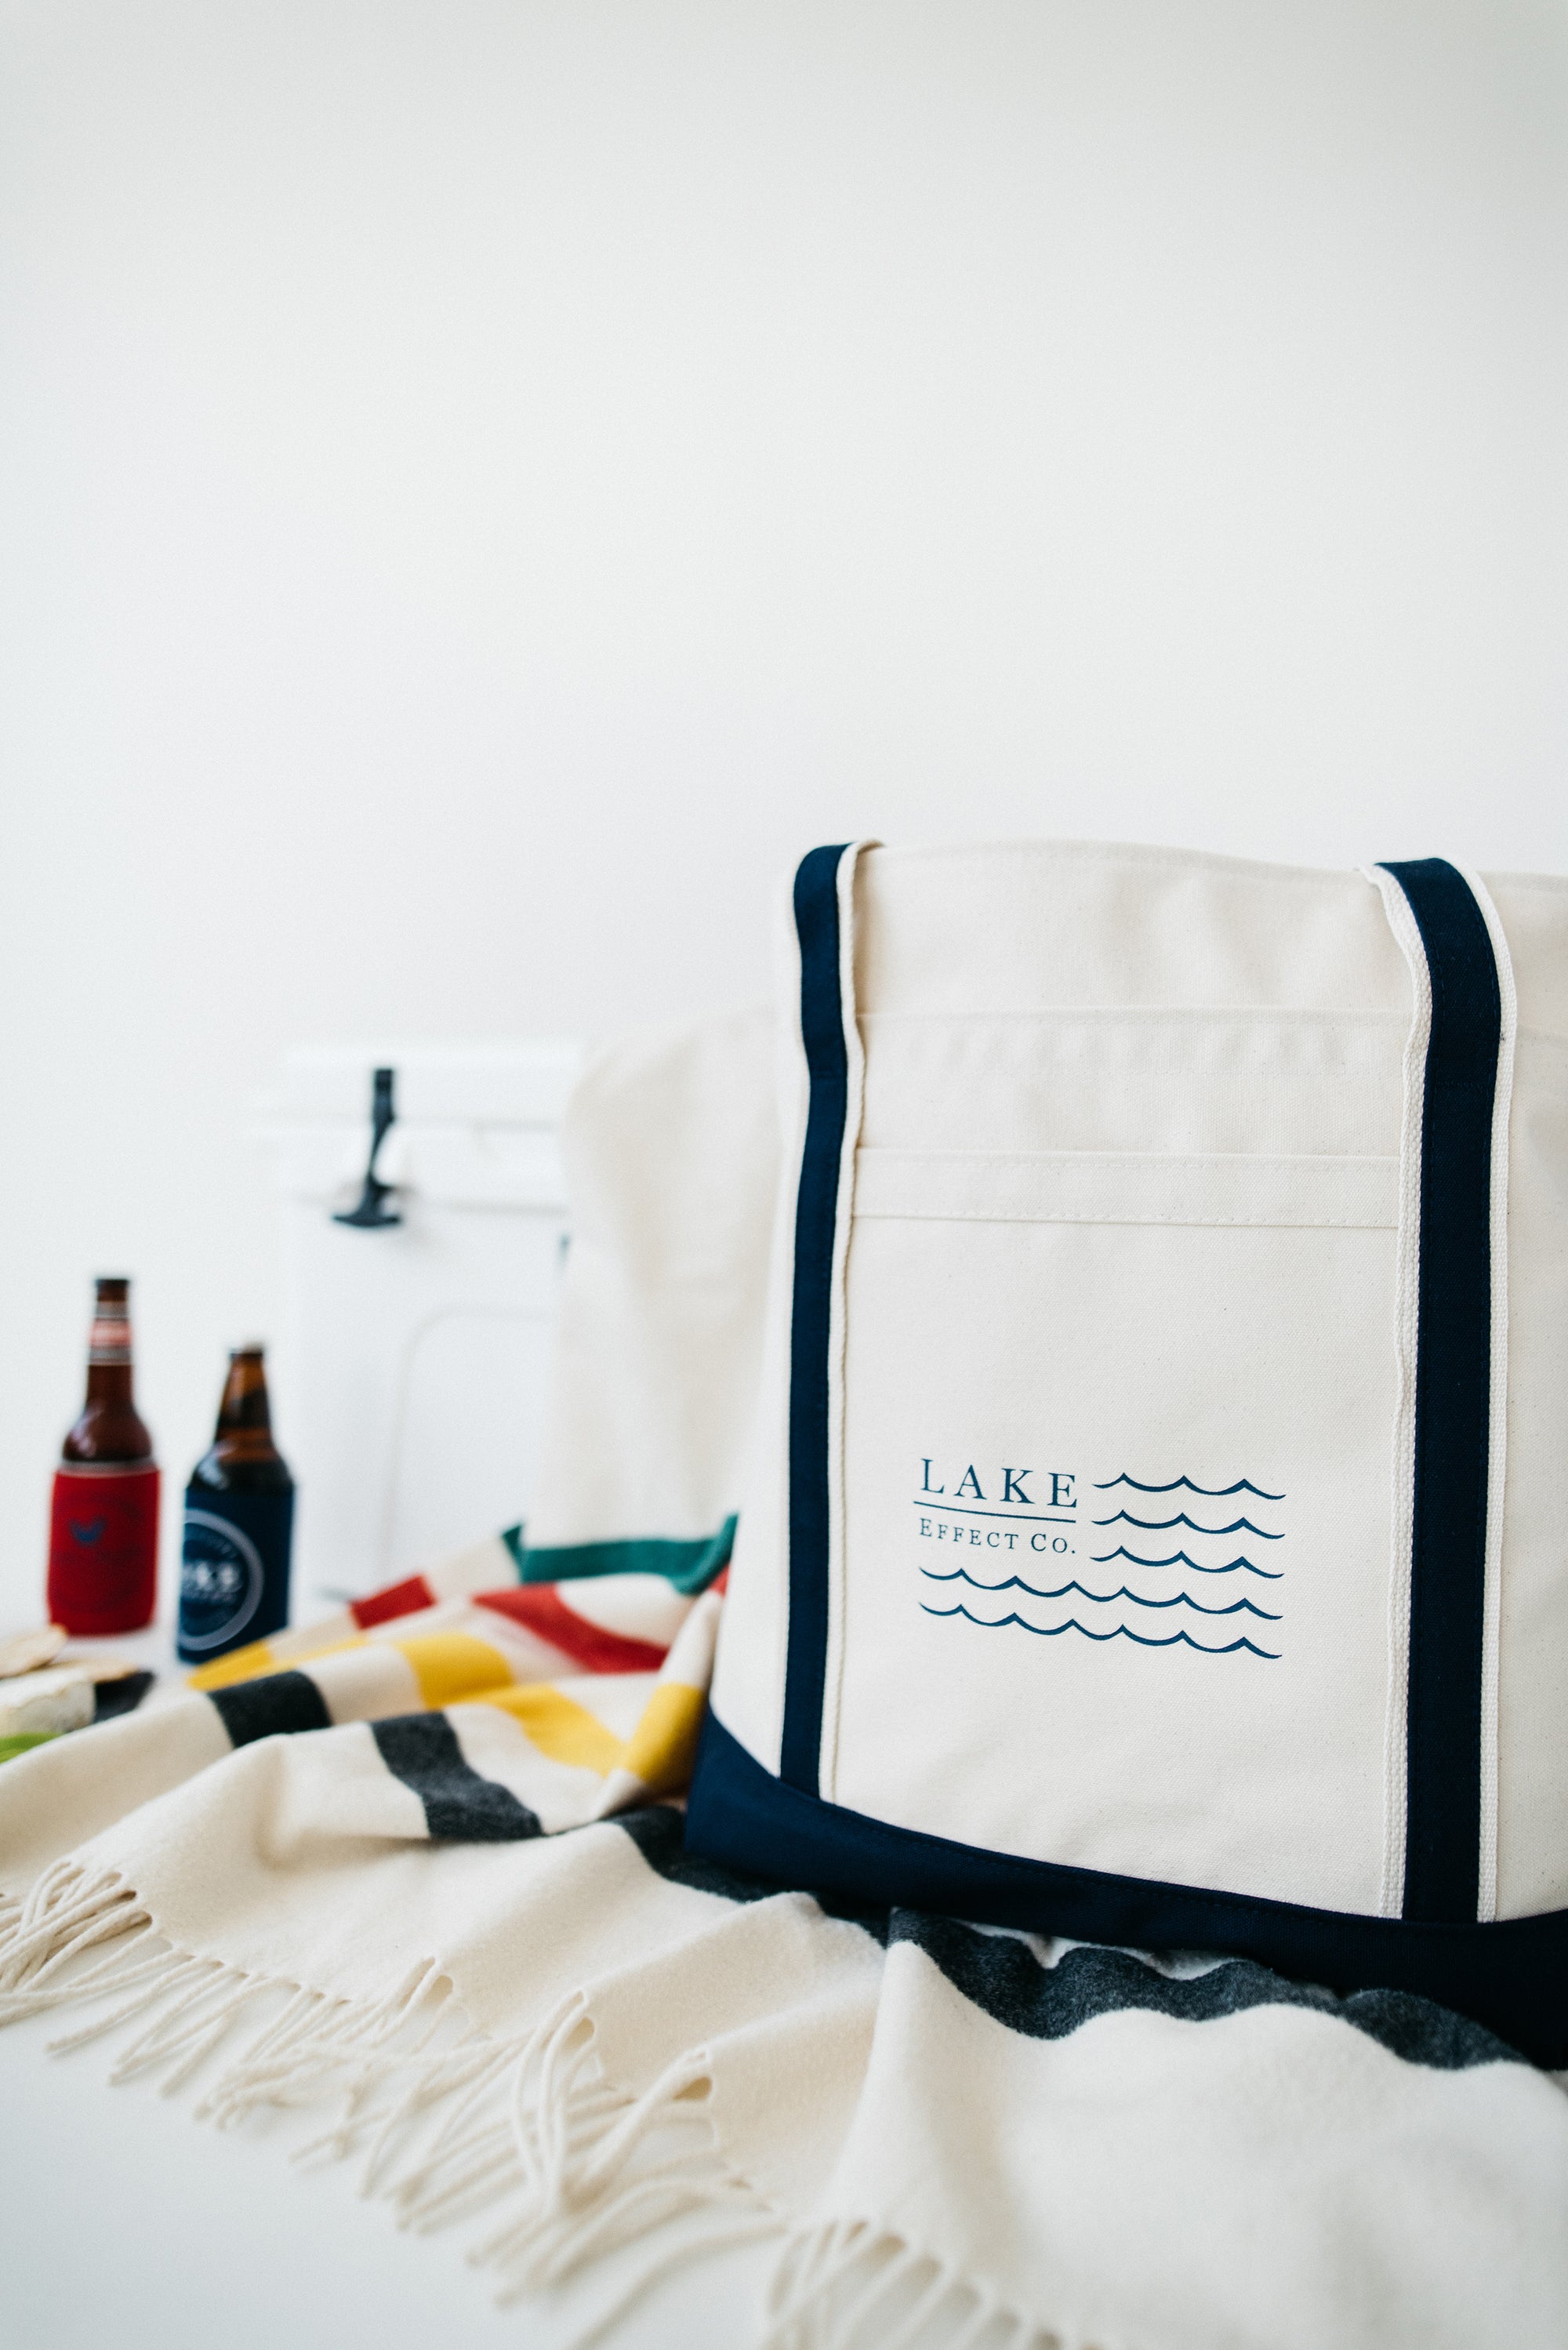 How to Pack Your Beach Bag for a Lake Day